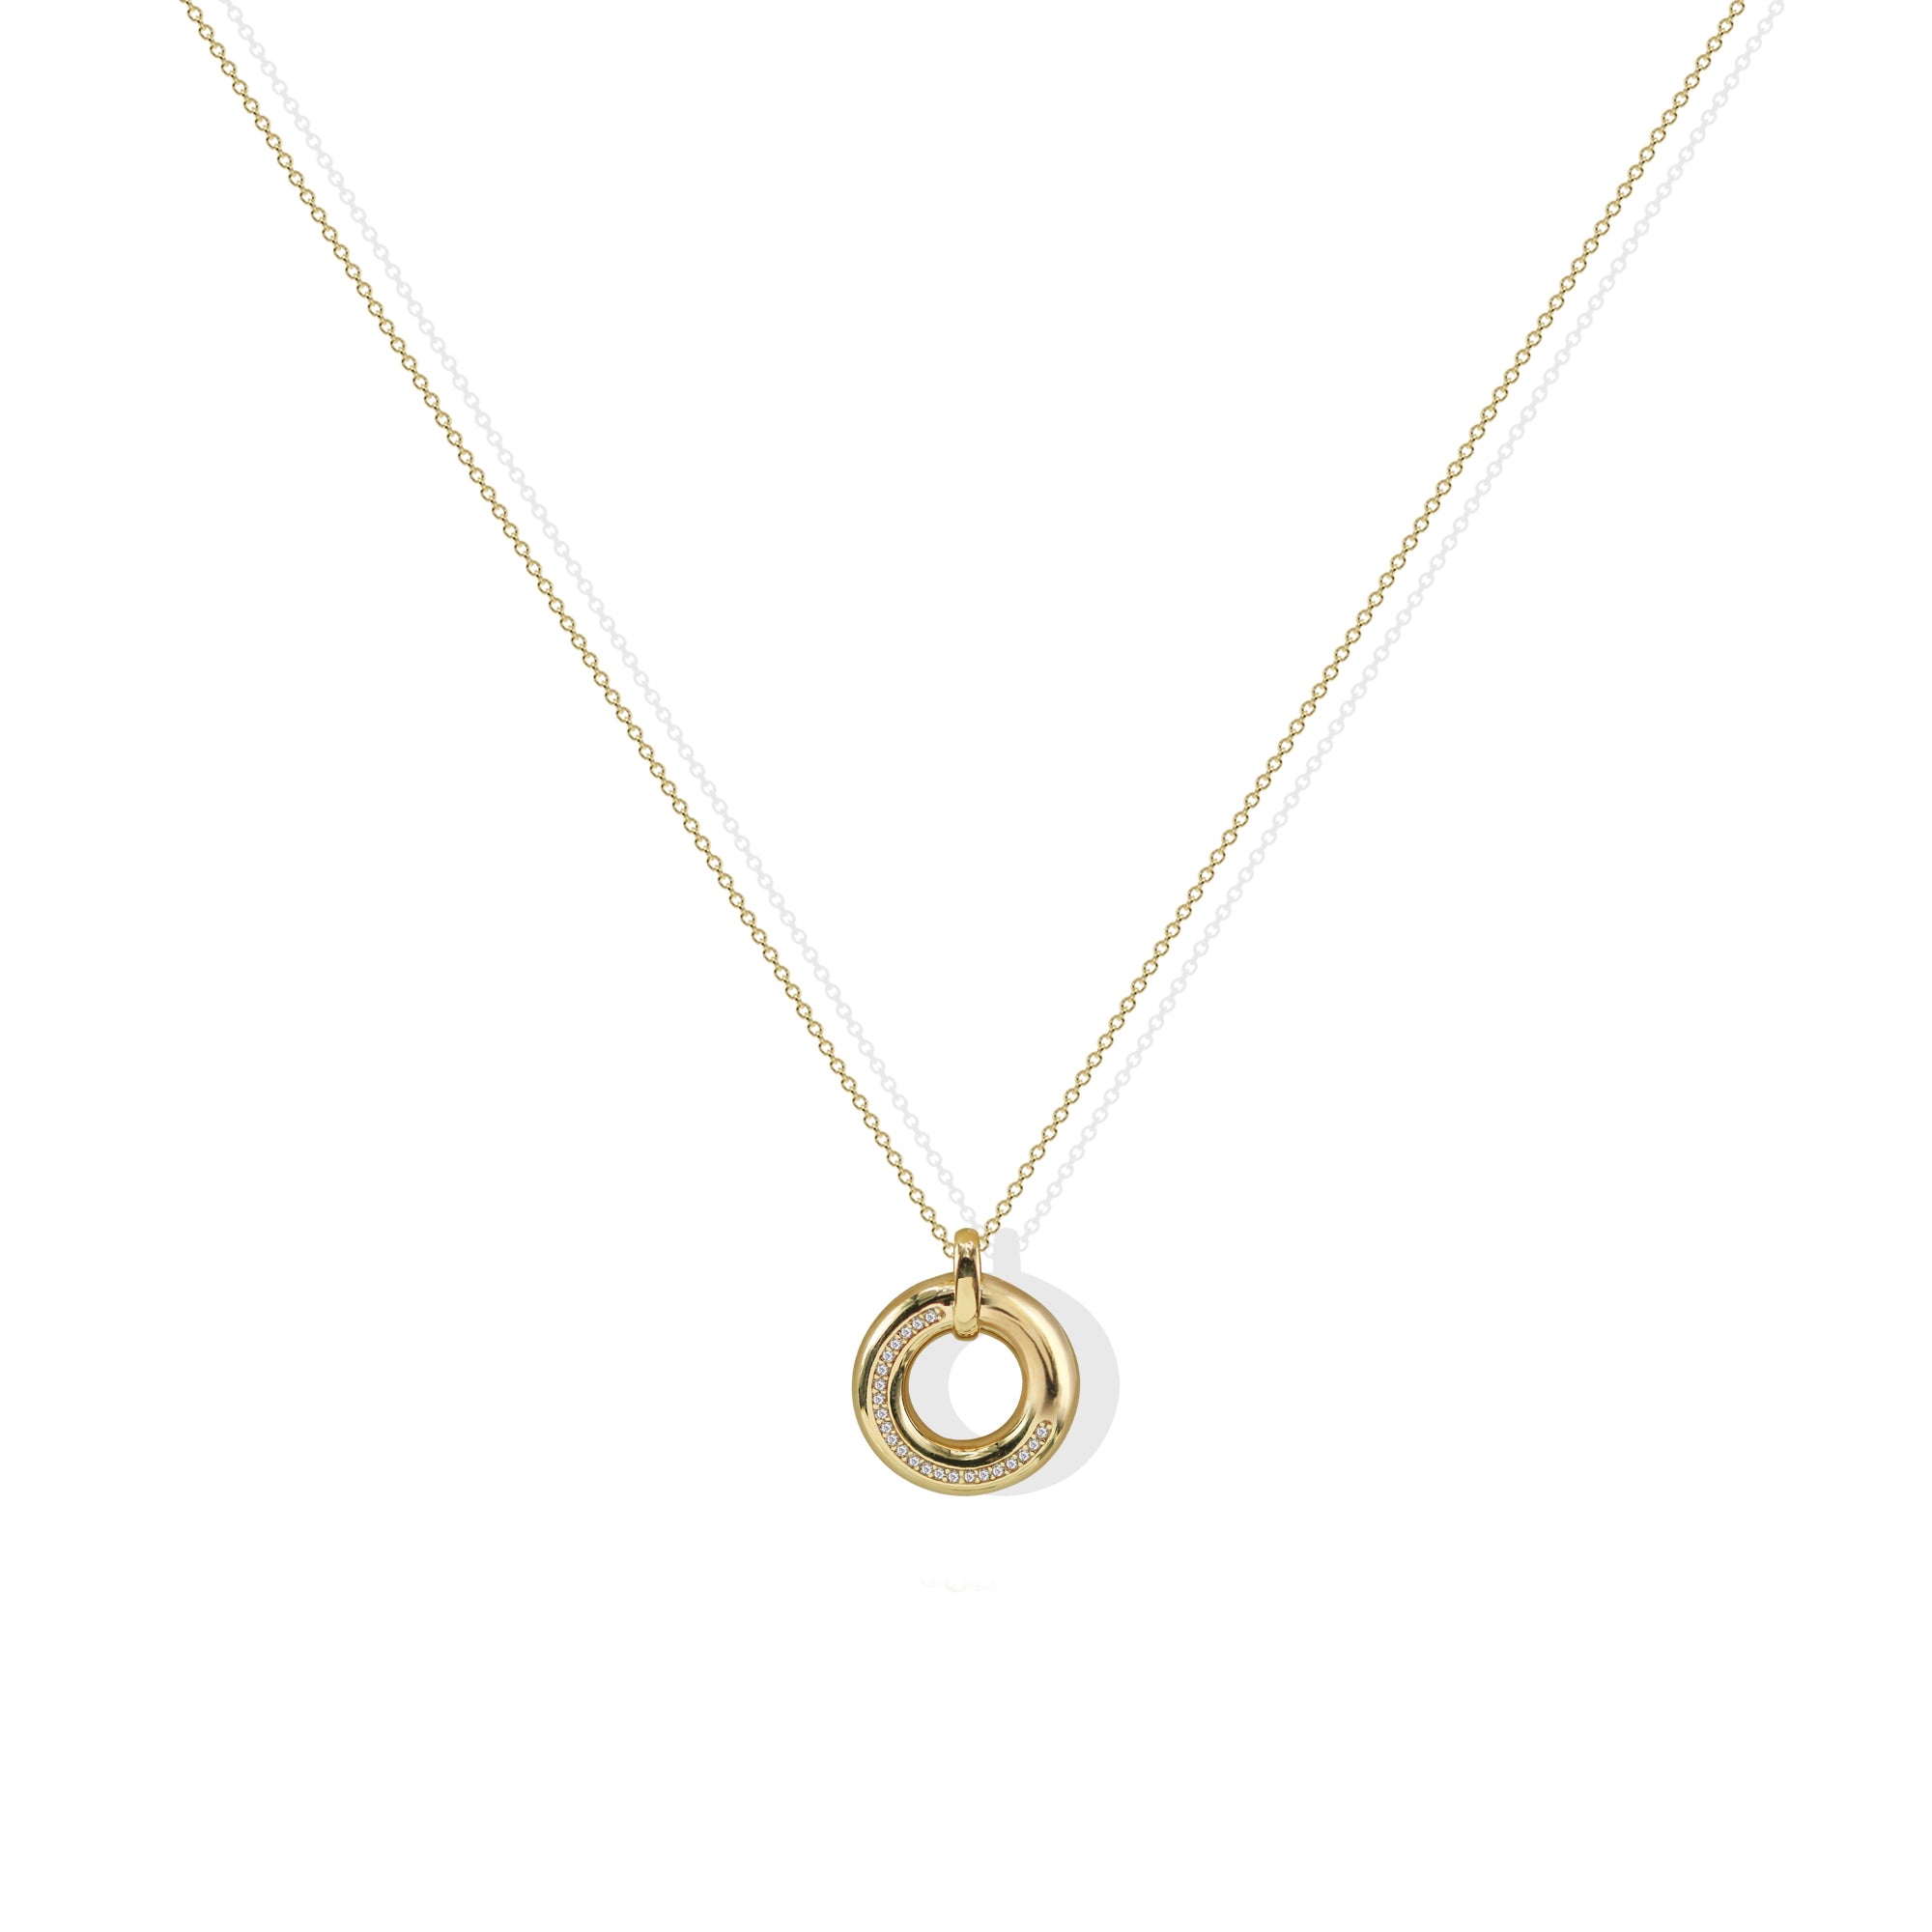 THE SMALL CIRCLE PENDANT NECKLACE